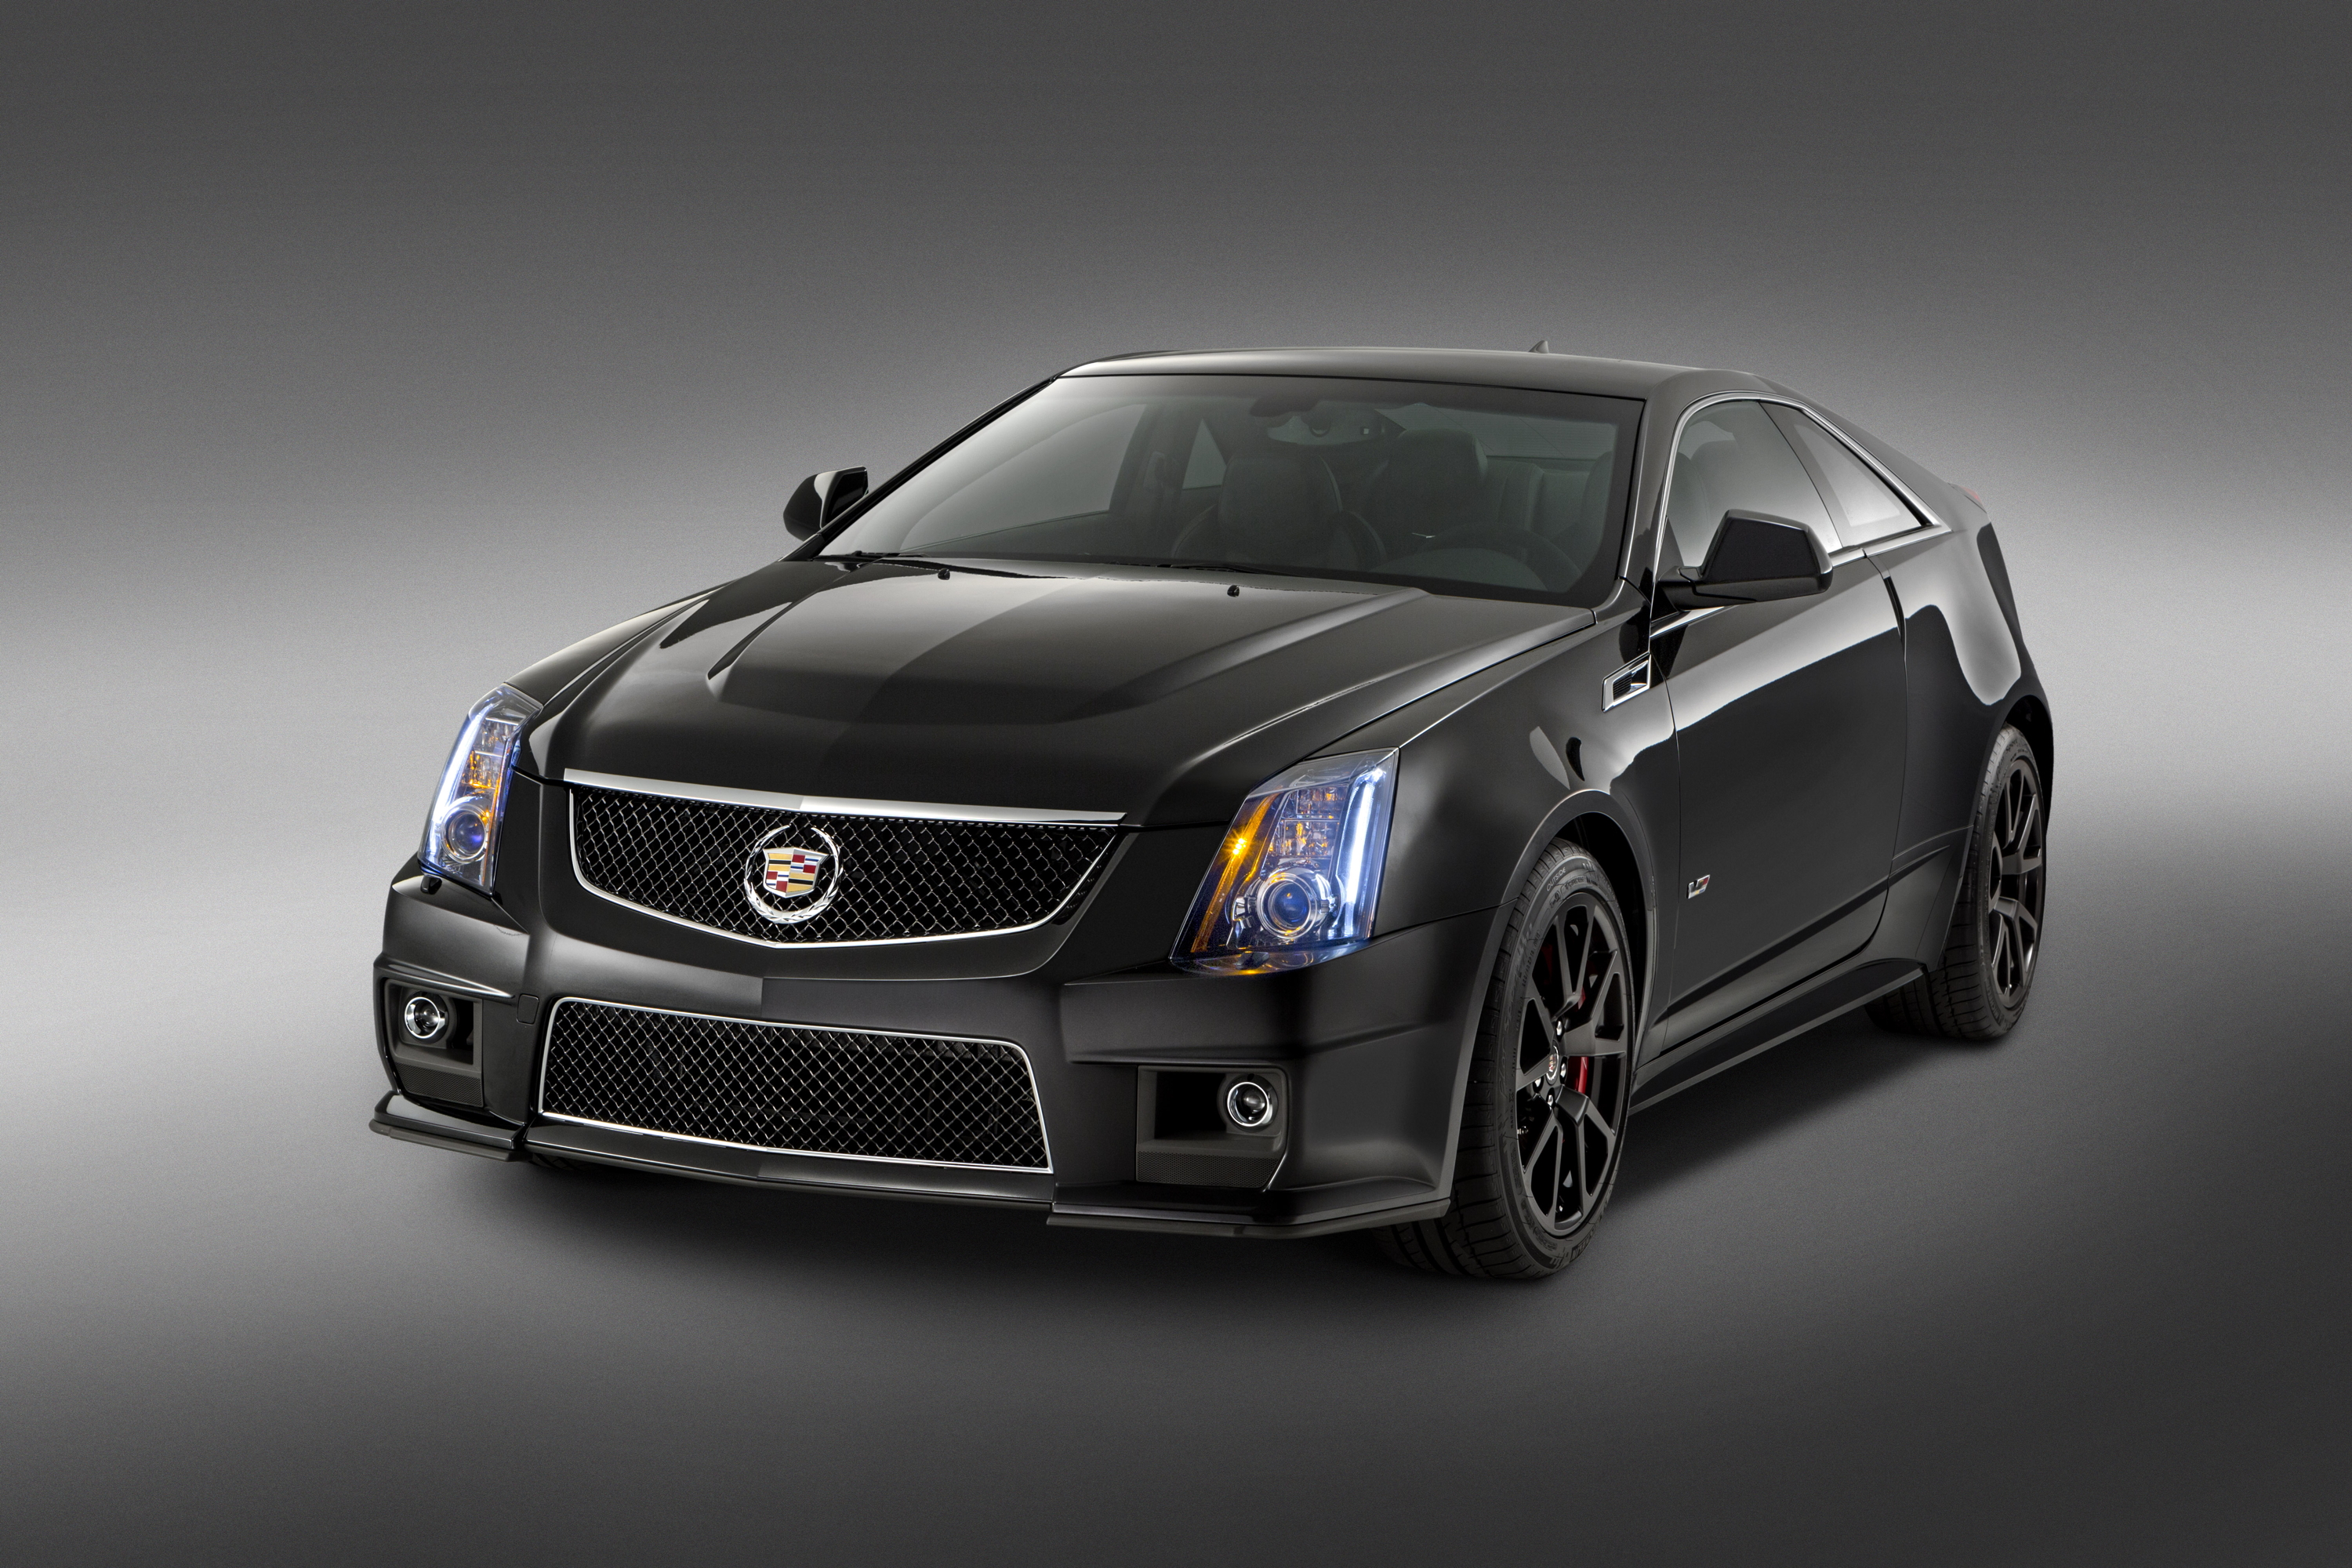 2015 Cadillac Cts V Coupe Special Edition Closes Out This Generation The Fast Lane Car